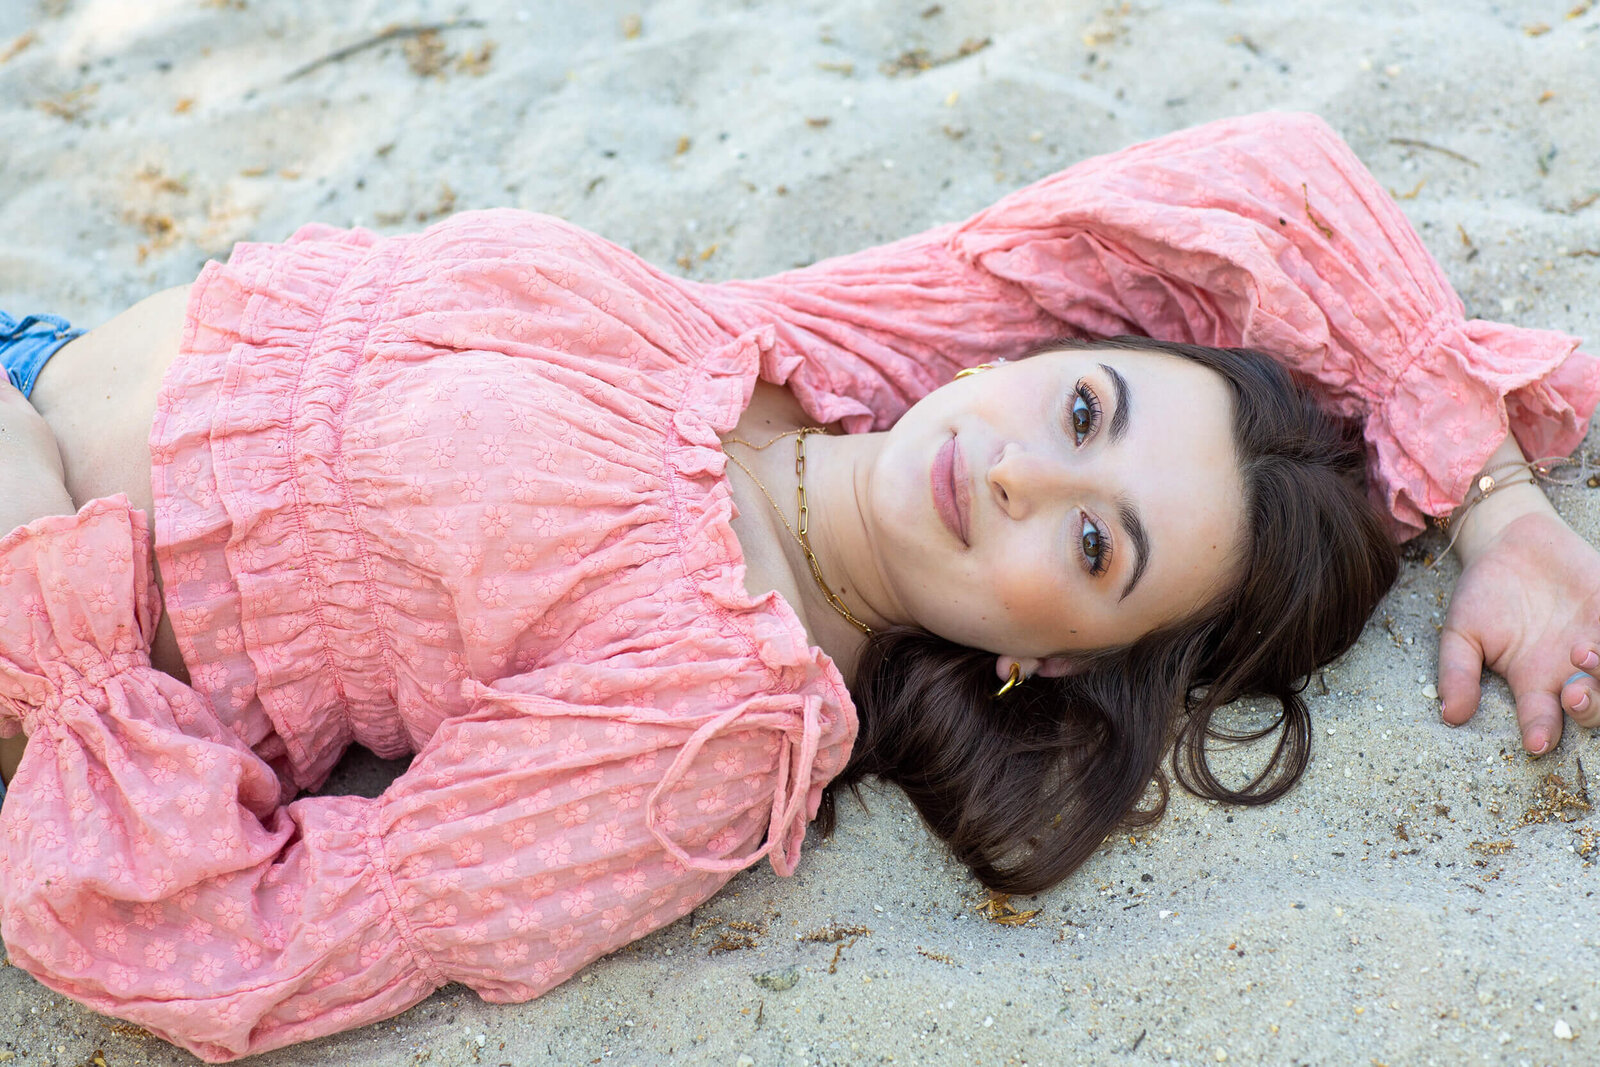 Teen pictures at beach - Paige P Photography